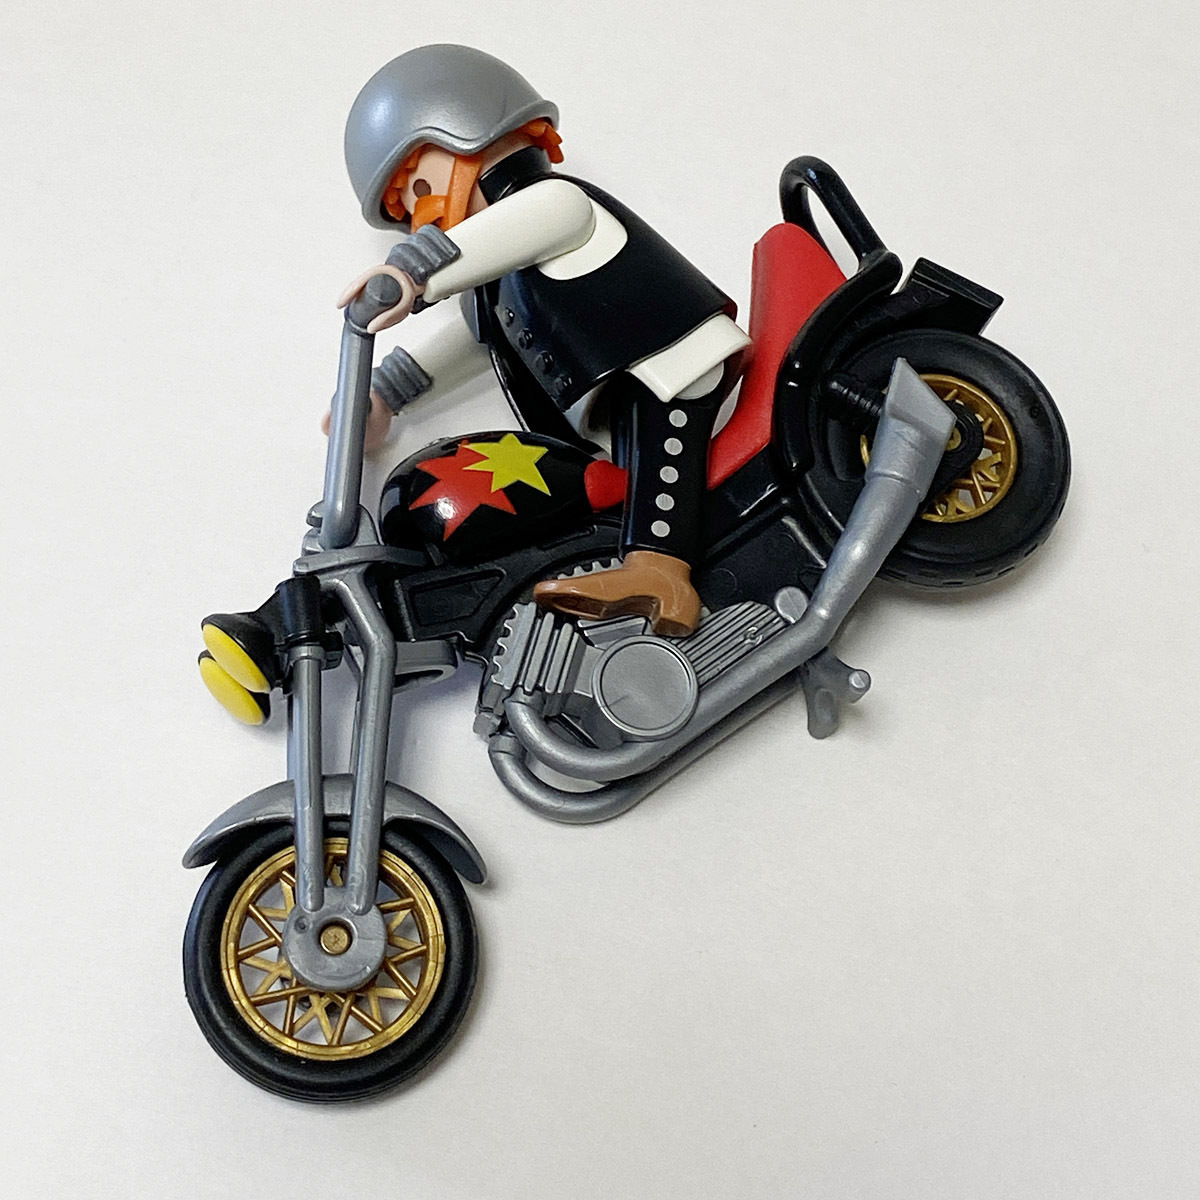 playmobil 3831 Play Mobil chopper * rider Chopper Rider bike motorcycle out of print waste number box attaching secondhand goods 